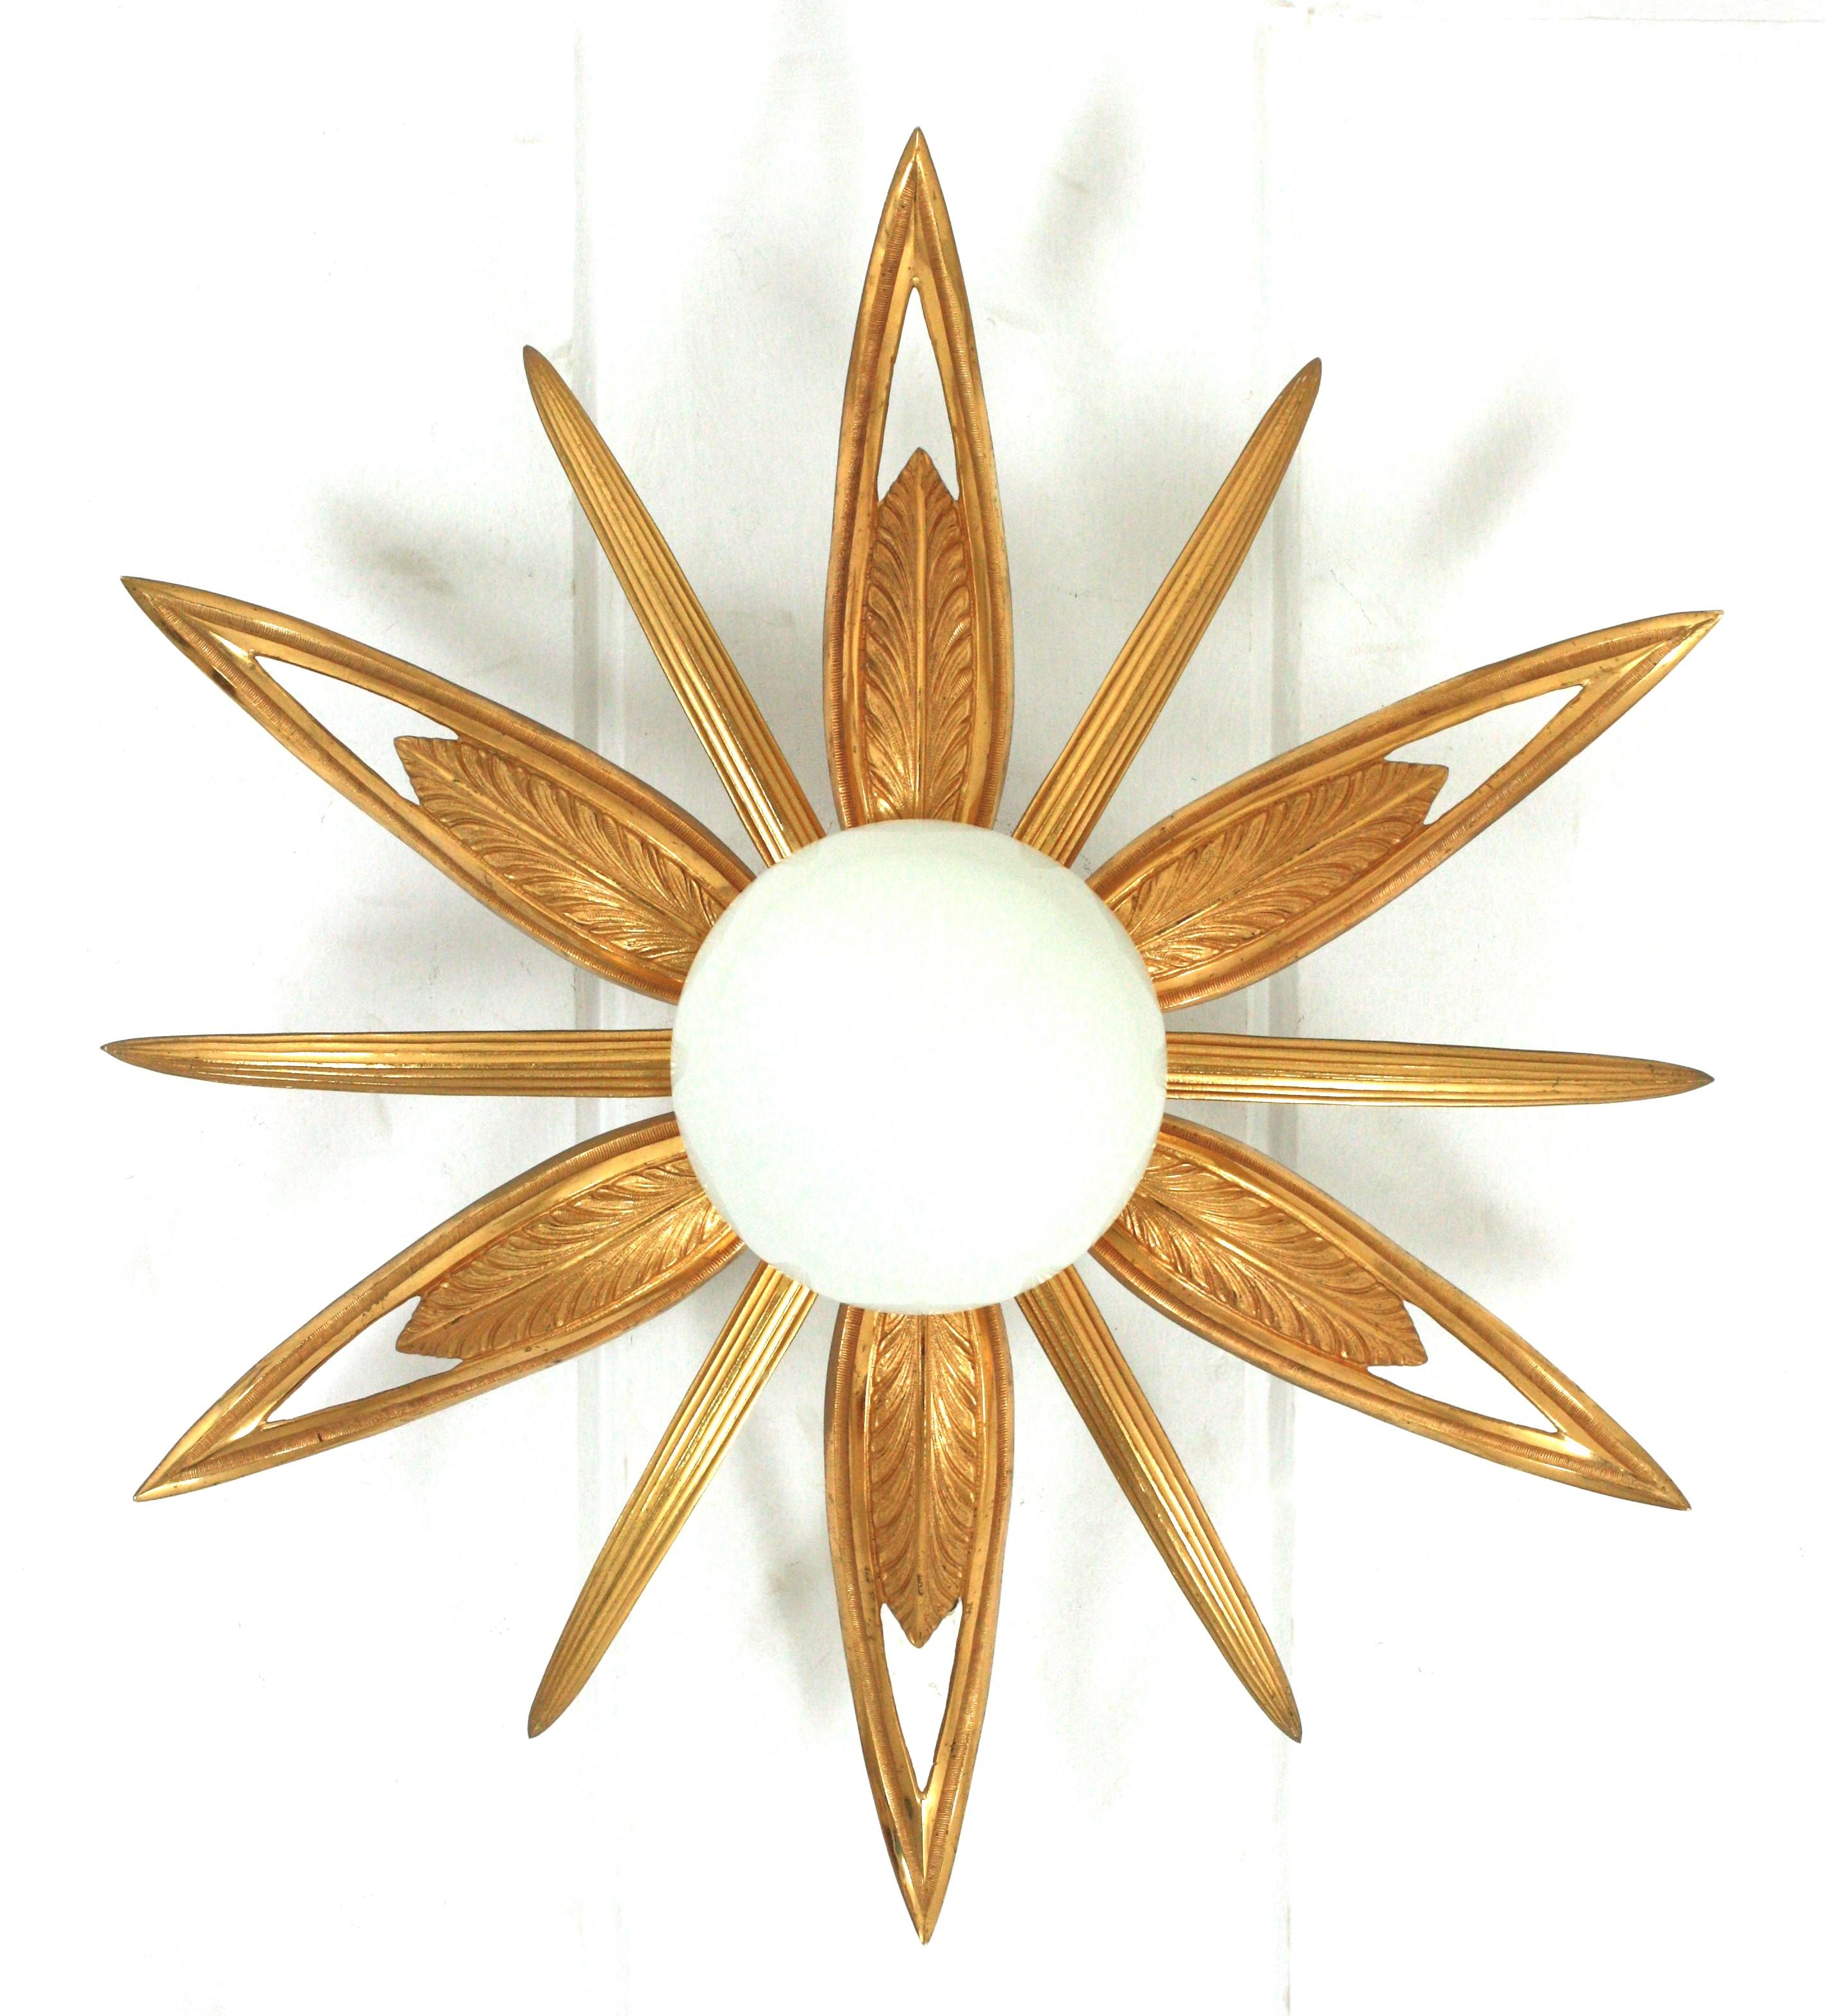 An exceptional Art Deco starburst shaped engraved and molded bronze ceiling lamp, France, 1930s-1940s.
7 lights
This flush mount features a flower burst or starburst with 6 large leaves or rays, 6 pointed smaller rays and an opaline white glass